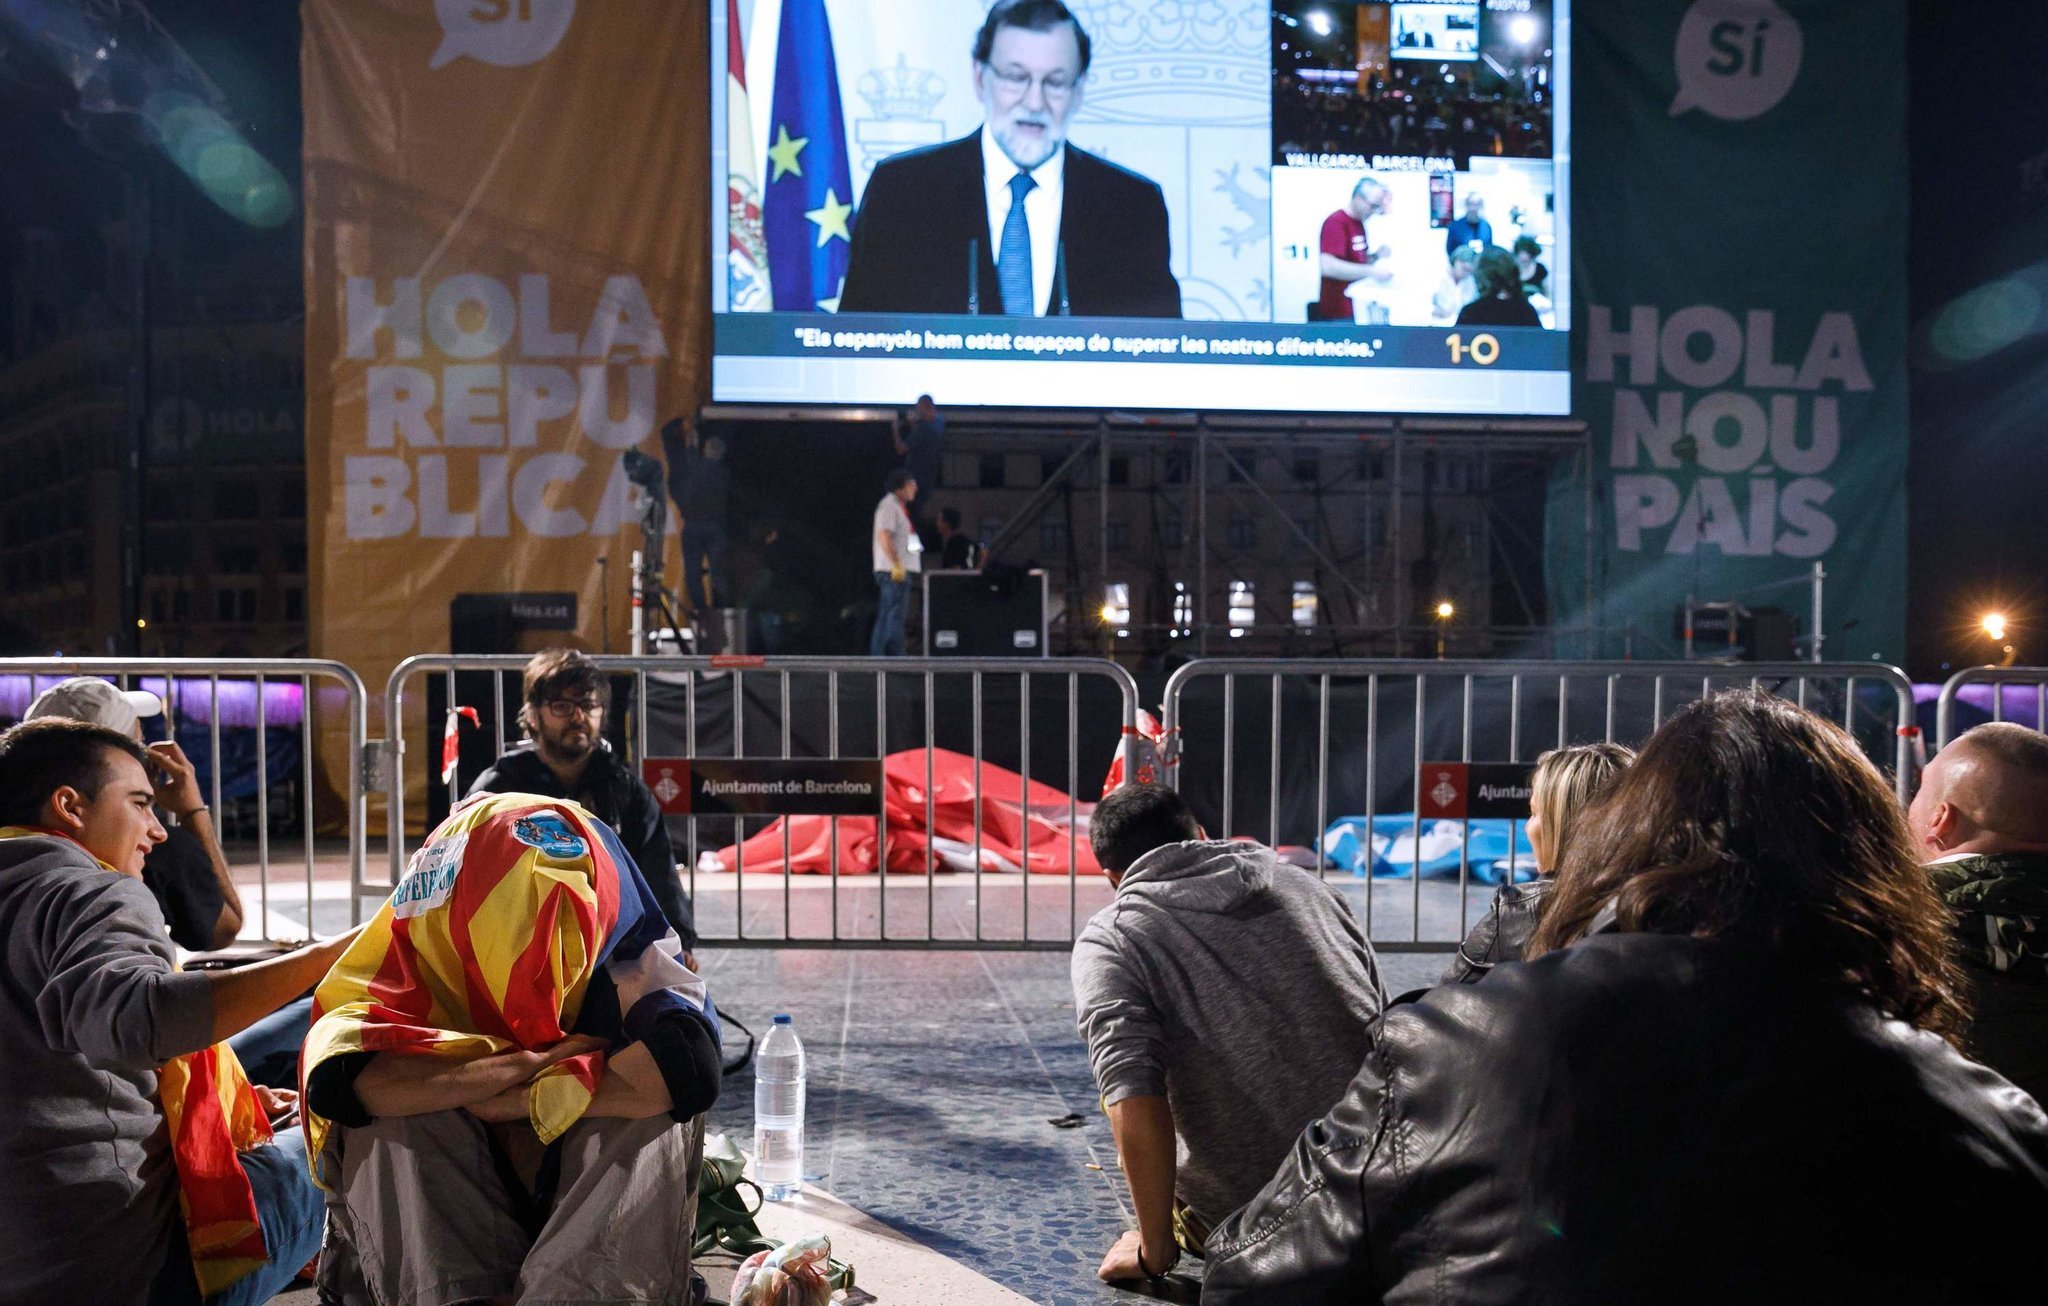 People gathering in Barcelona to wait for referendum results on Sunday evening watched a speech by Prime Minister Mariano Rajoy. Credit Cesar Manso/Agence France-Presse — Getty Images